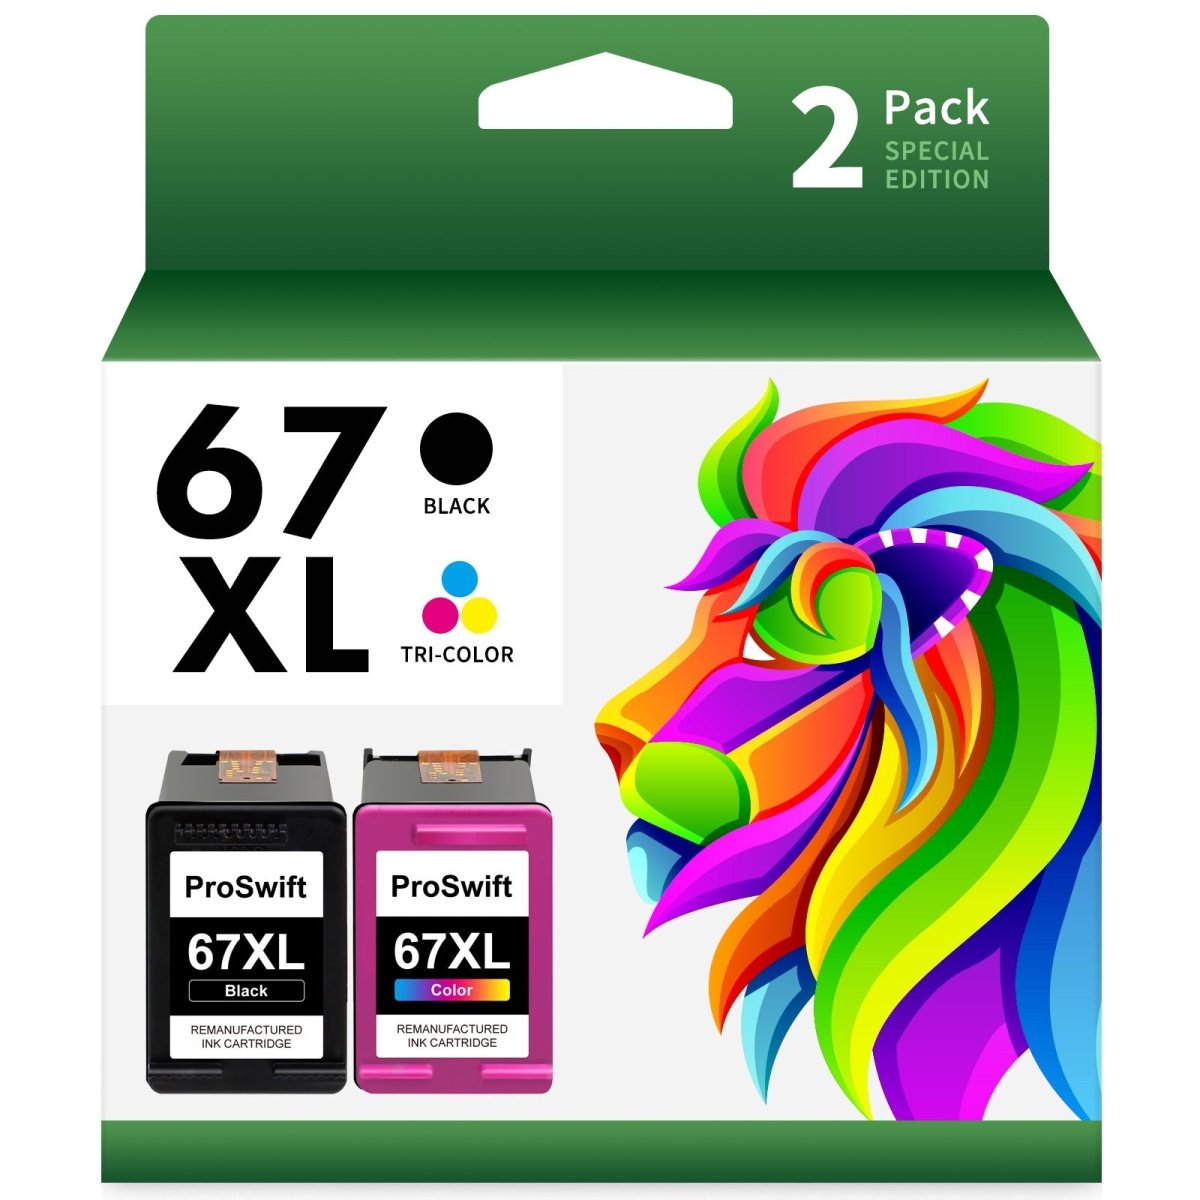 ProSwift 67XL Ink Cartridges Black&Color Combo Pack Remanufactured Replacement for HP 67 Ink High-Yield for HP Envy 6000 6055 6055e 6400e 6455e 6458e Deskjet 2742e 2752e 2755e Envy Pro 6455 6458 2Pack - Linford Office:Printer Ink & Toner Cartridge